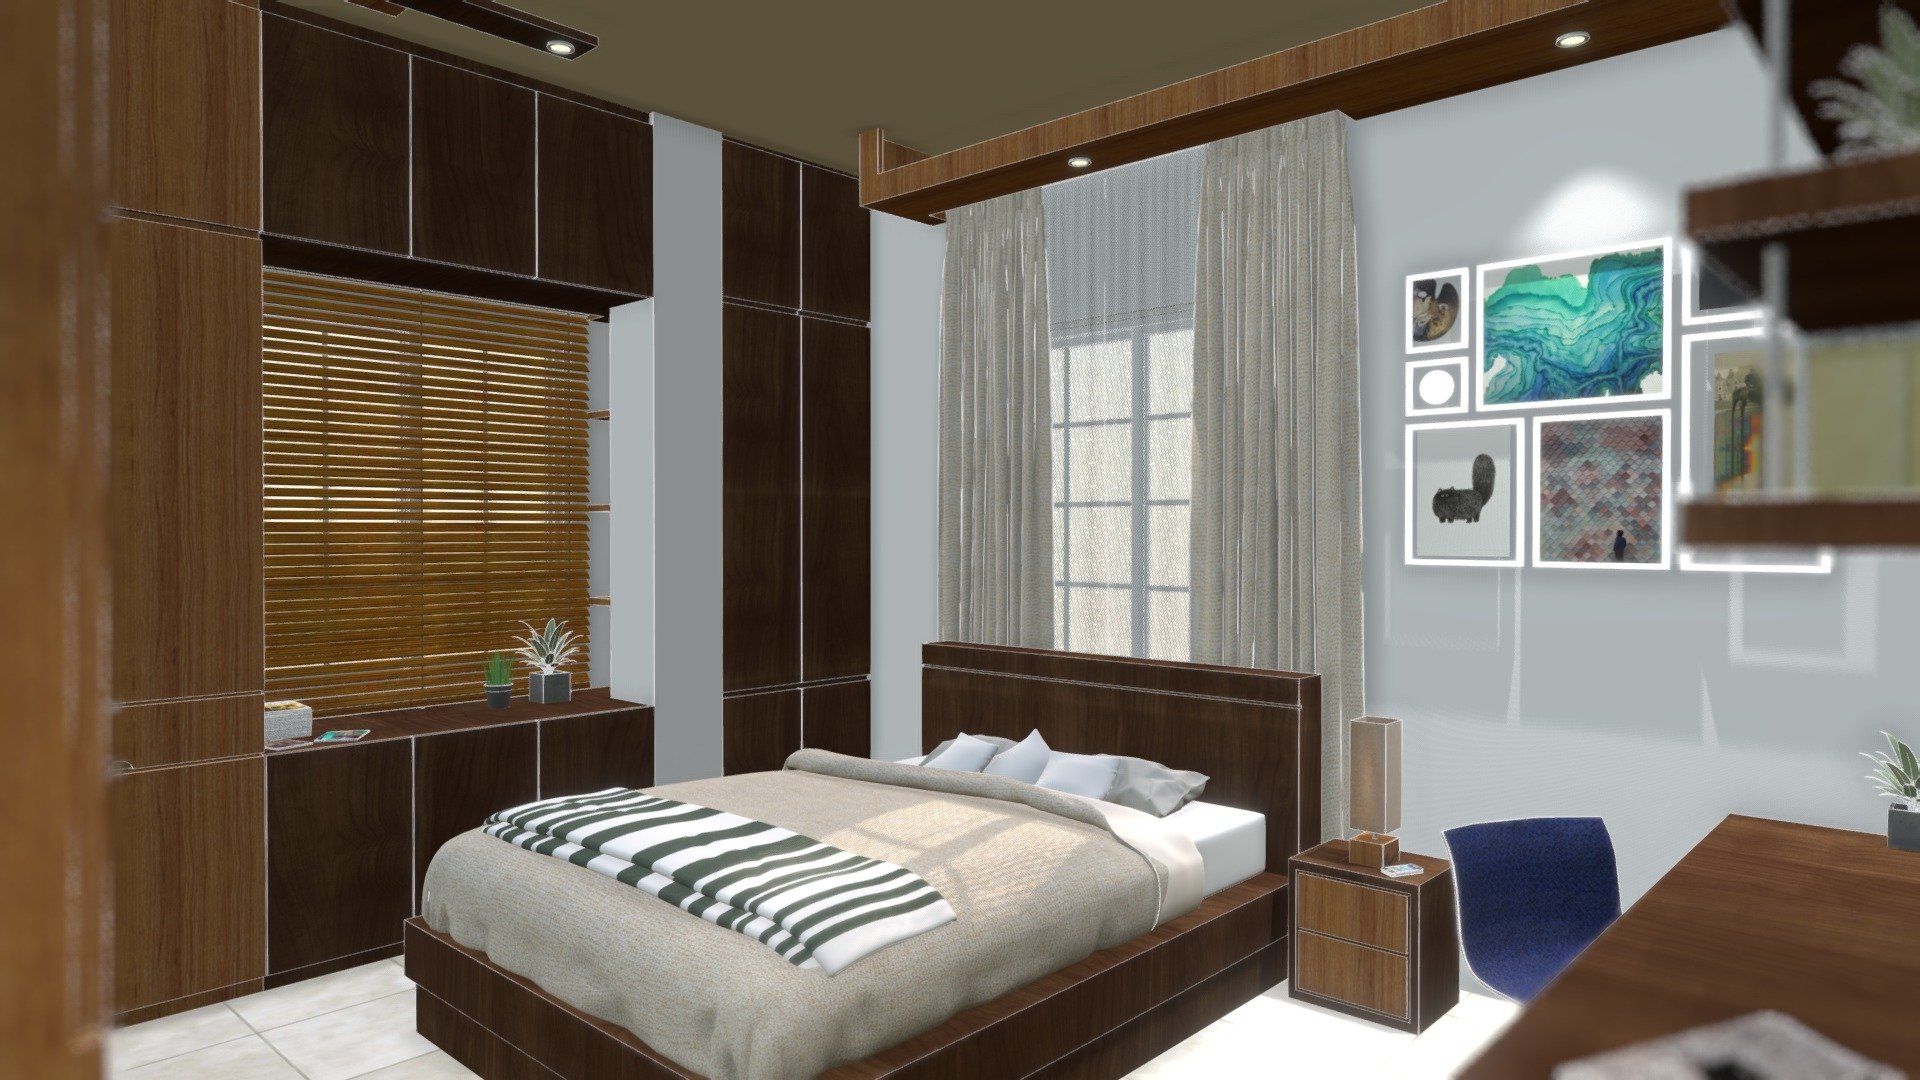 This is a Bedroom Interior Design by Me for a friend. Don't forget to navigate in First Person. Please enjoy! And let me know what you think. Cheers! - Bedroom Interior Design - Buy Royalty Free 3D model by MD Ashfaq Bin Arif (@tafar165) 3d model